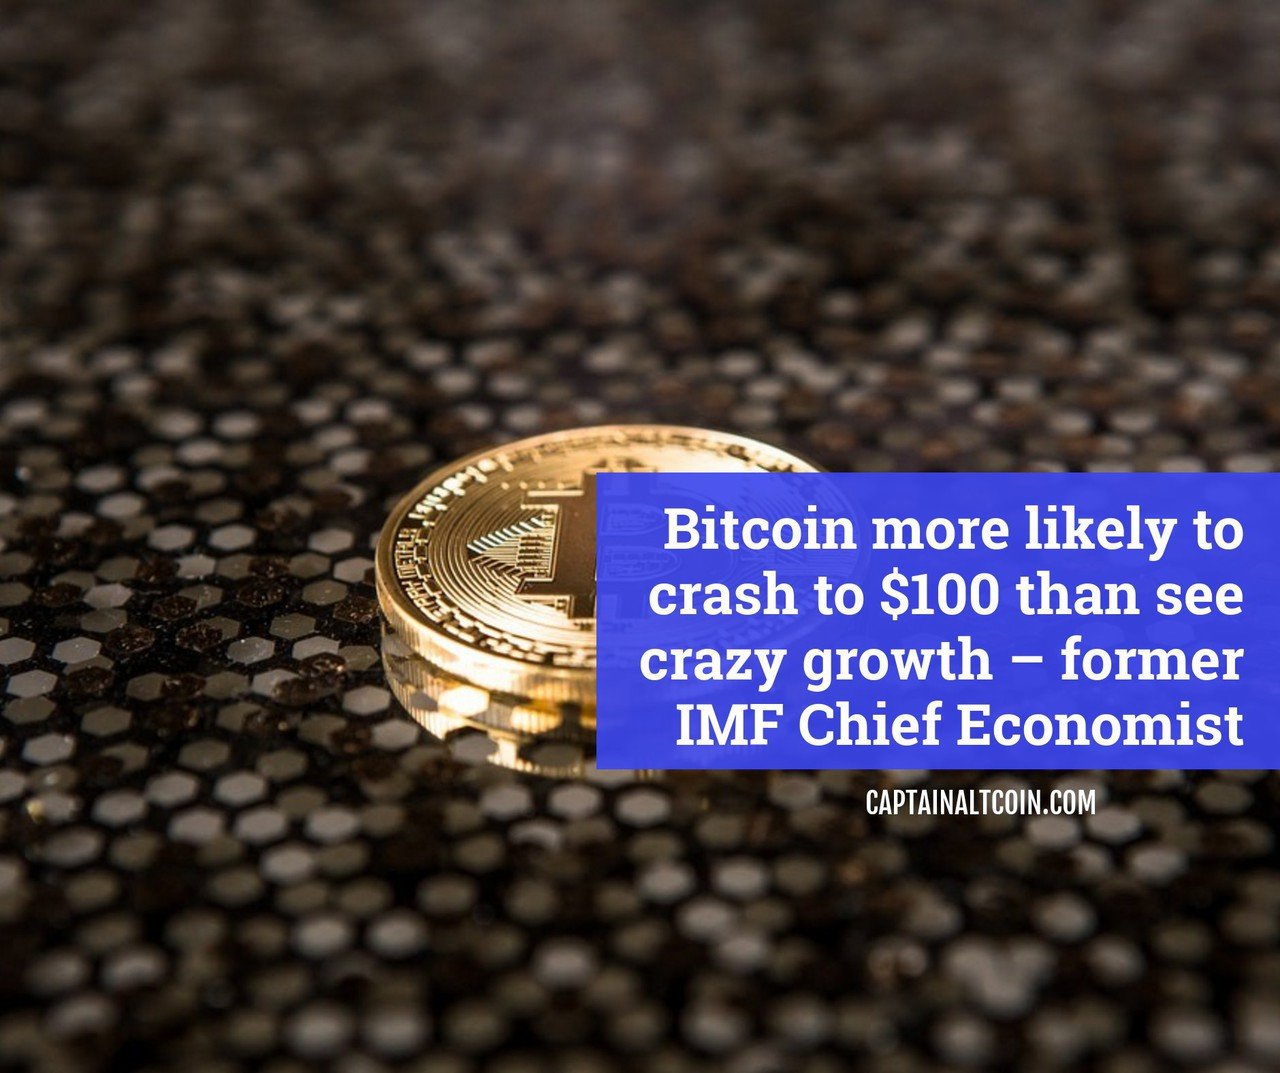 Bitcoin more likely to crash to $100 than see crazy growth – former IMF Chief Economist